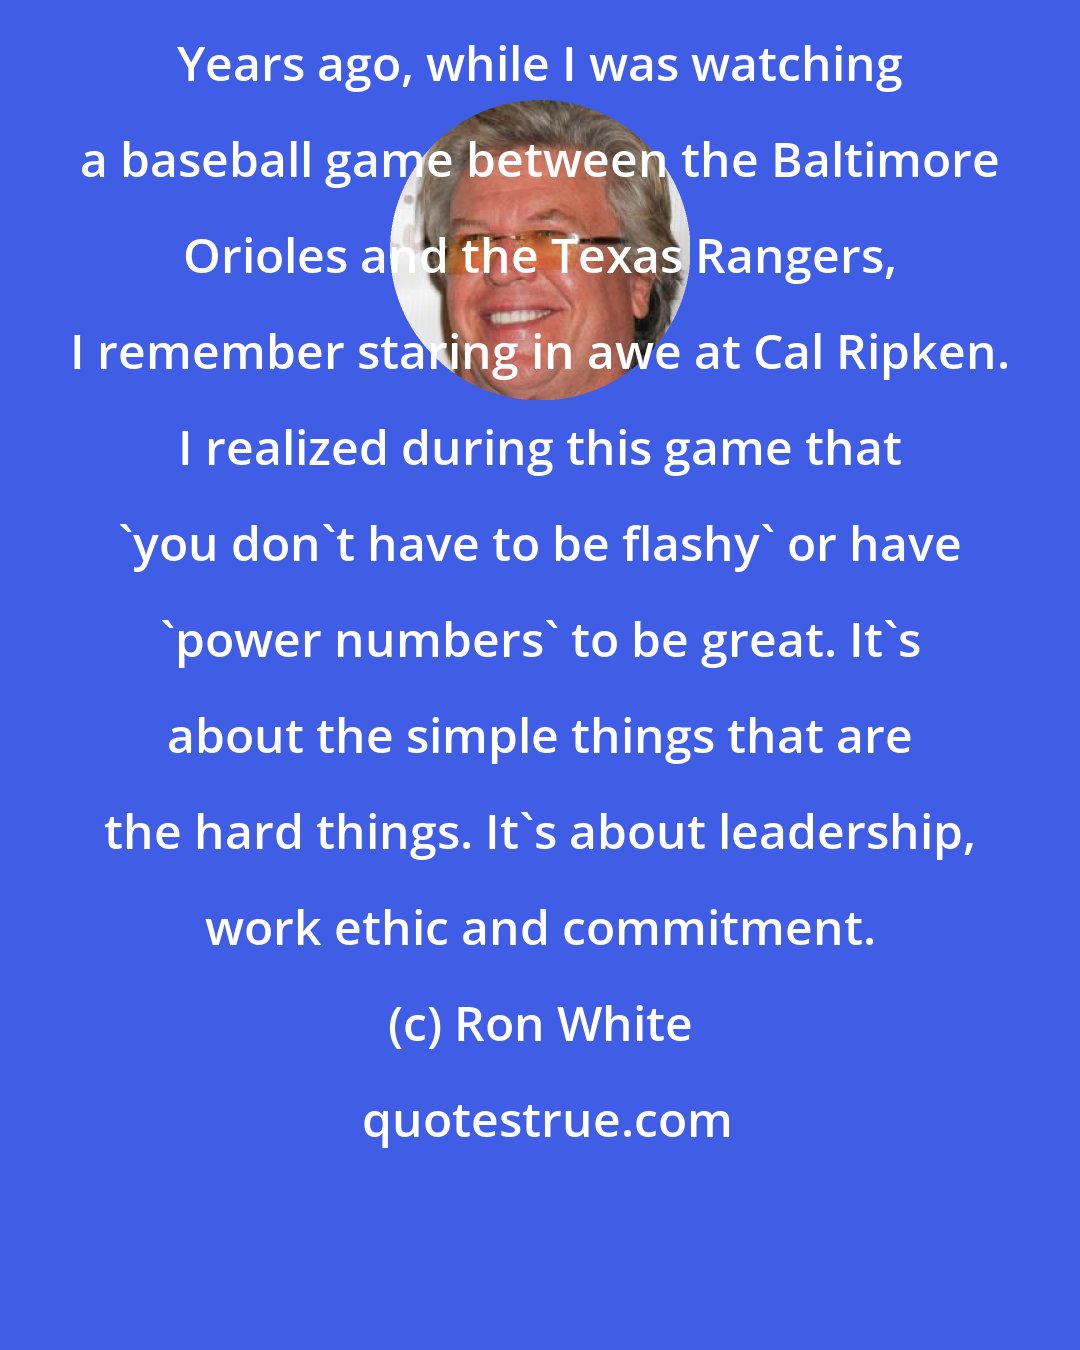 Ron White: Years ago, while I was watching a baseball game between the Baltimore Orioles and the Texas Rangers, I remember staring in awe at Cal Ripken. I realized during this game that 'you don't have to be flashy' or have 'power numbers' to be great. It's about the simple things that are the hard things. It's about leadership, work ethic and commitment.